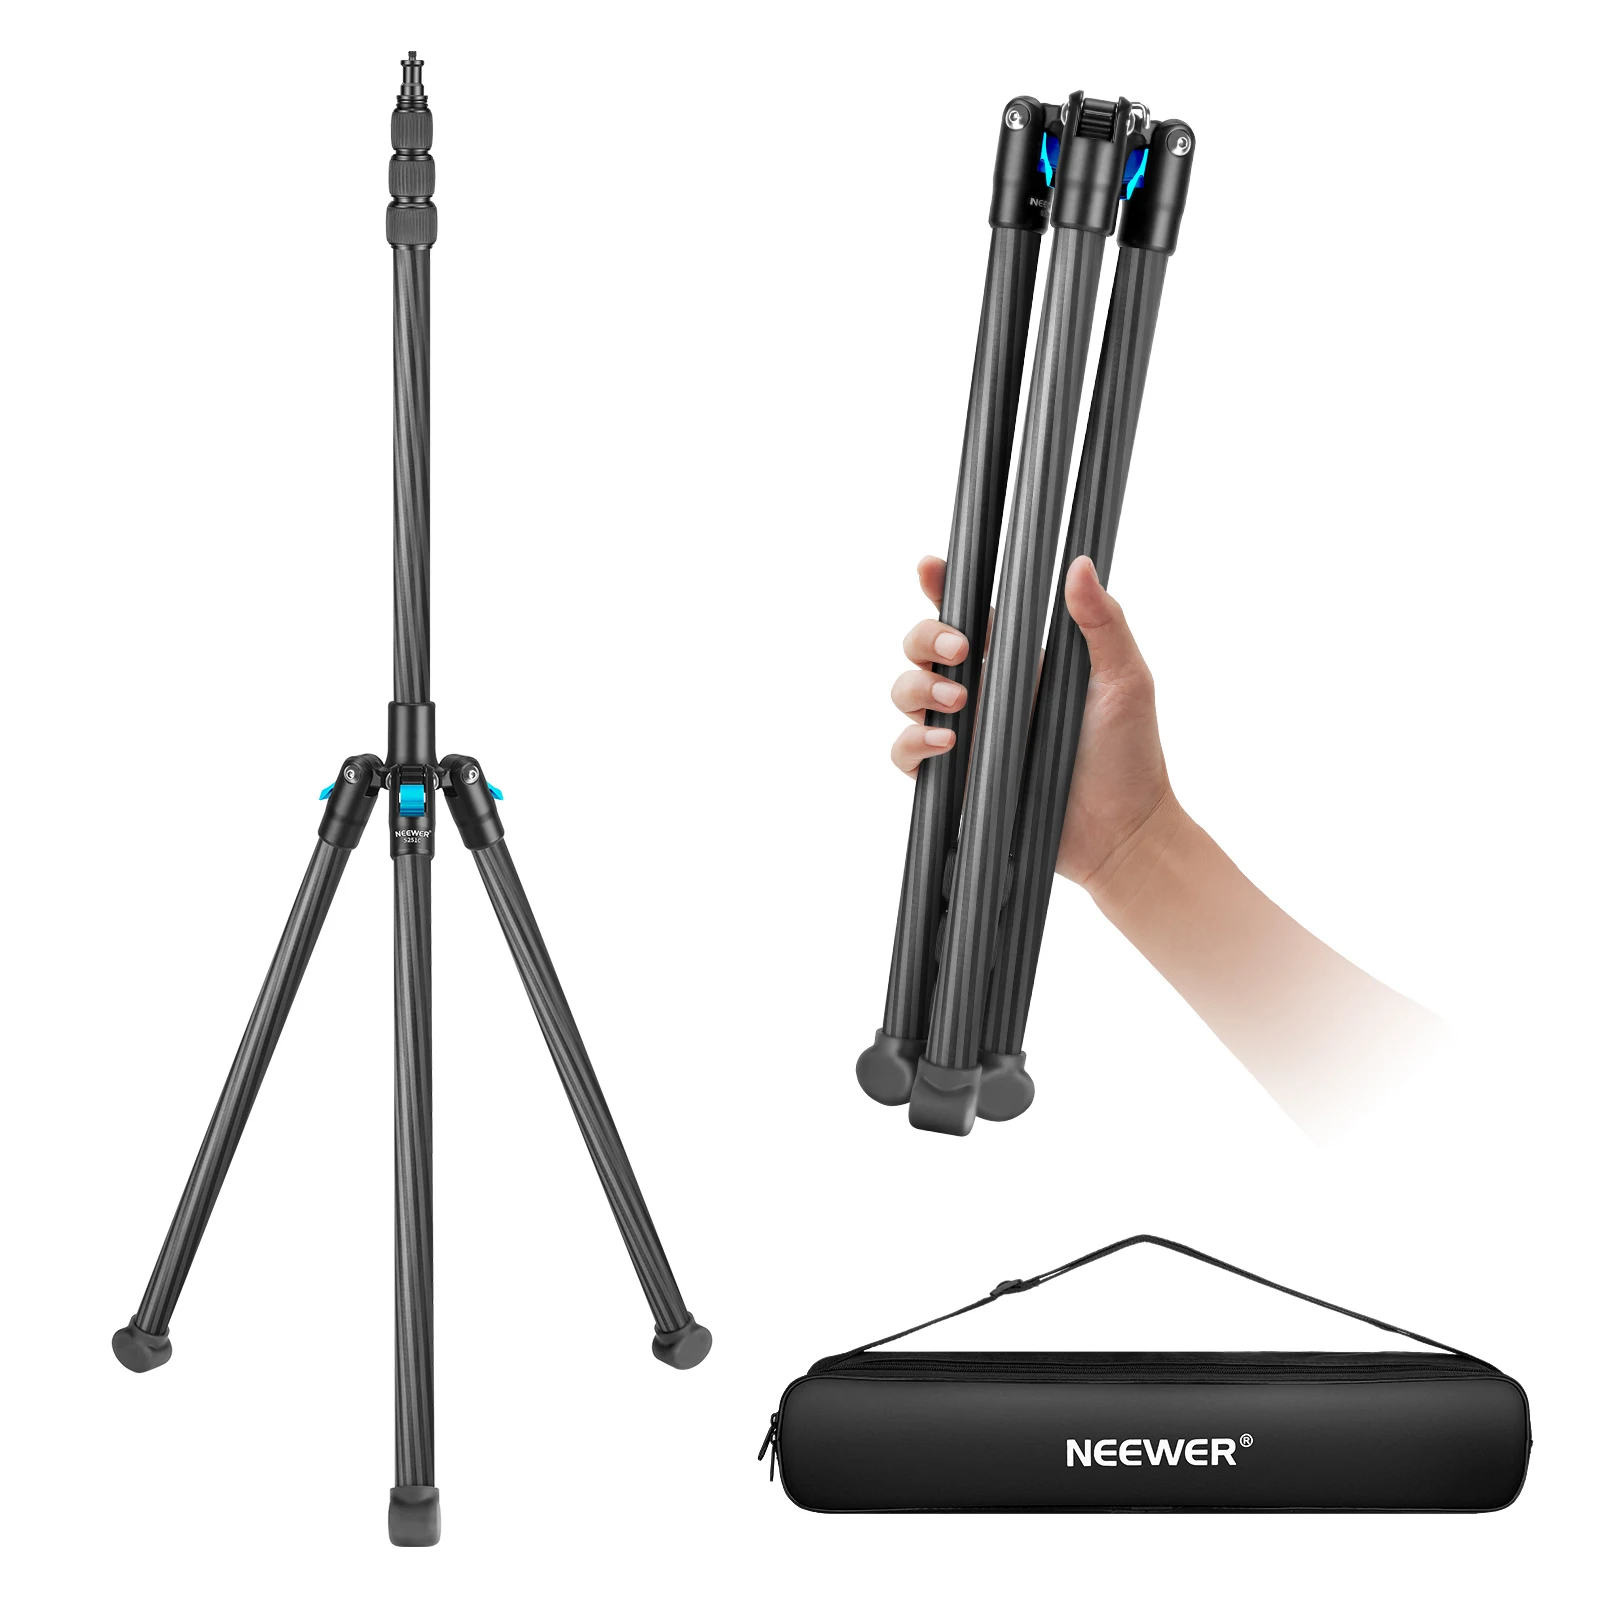 Neewer 78.7 Inches Photography Tripod Light Stand Foldable， Carbon Fiber Travel Tripod for Photo Studio Cameras， Light， Softbox